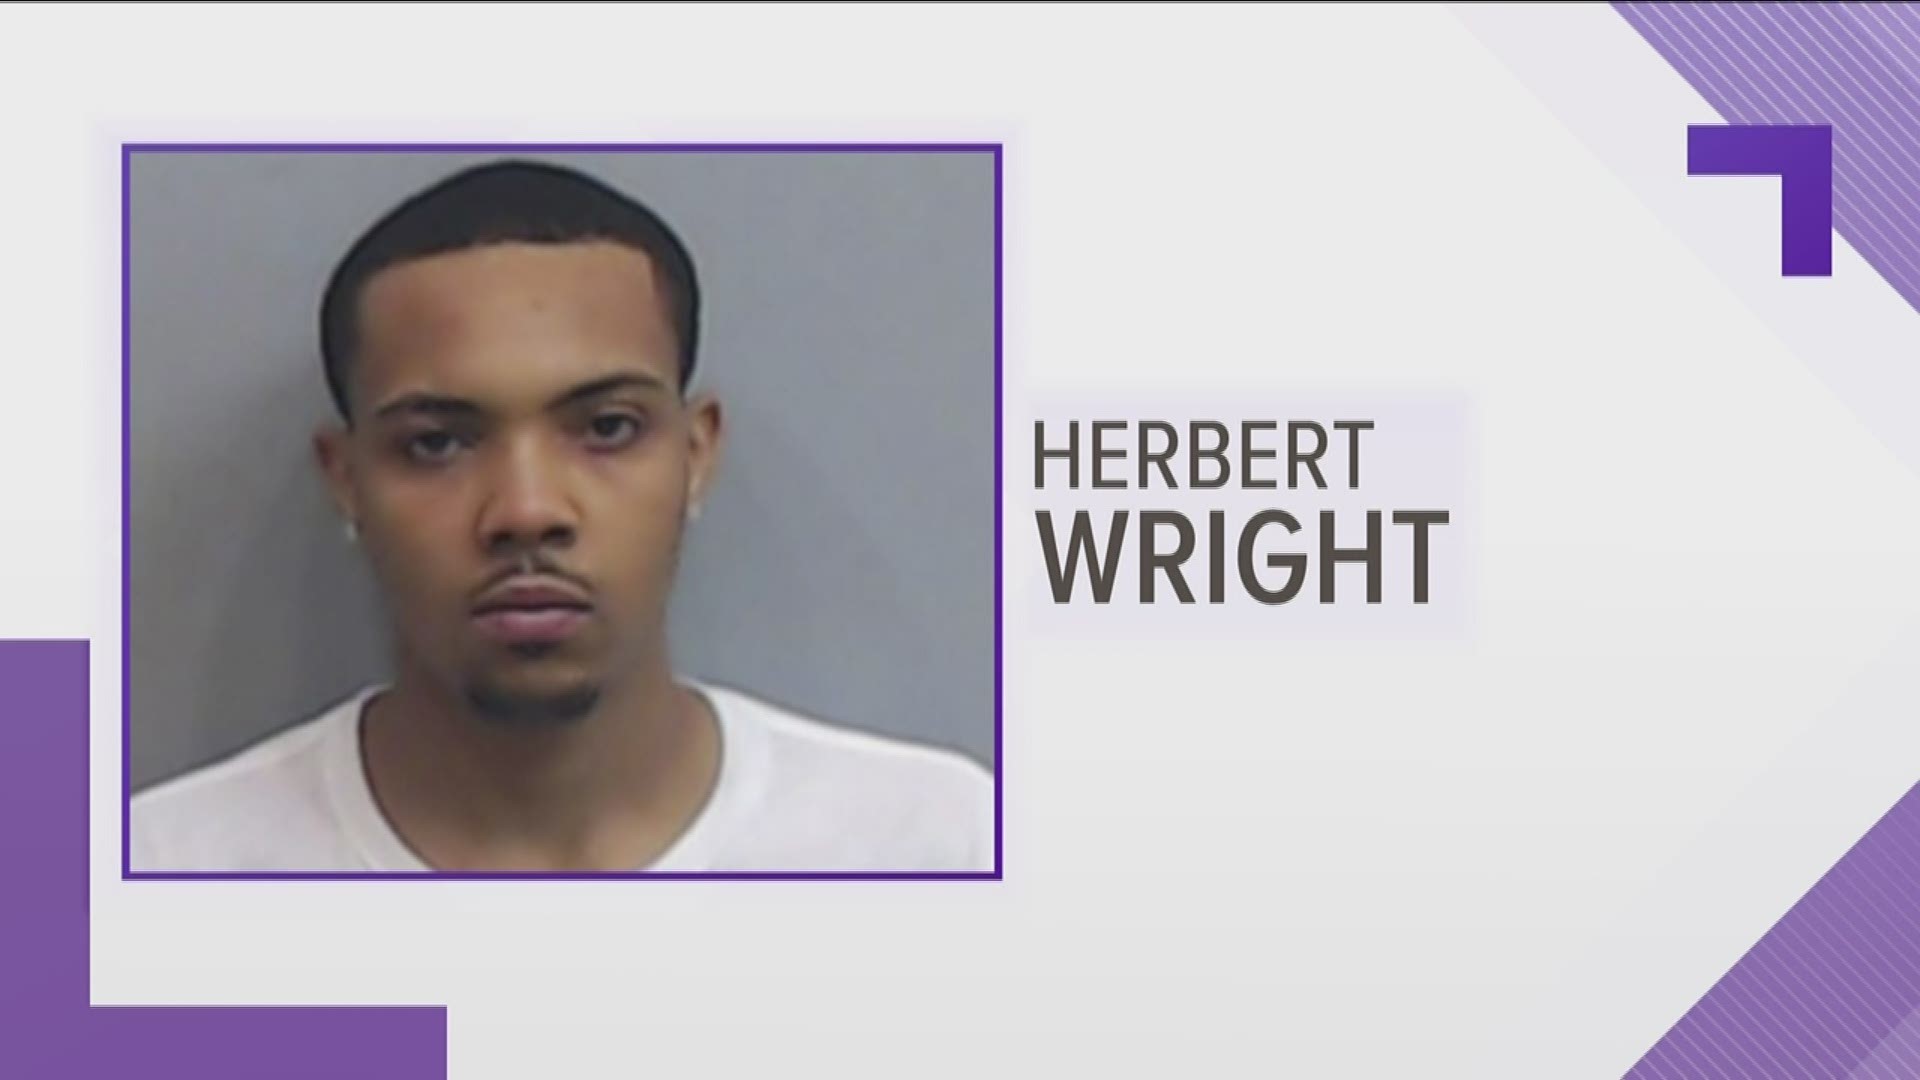 Jarius Daughtery with the Atlanta Police Department said a woman told police that she got into an argument with Wright, "the father of her child," that turned violent.